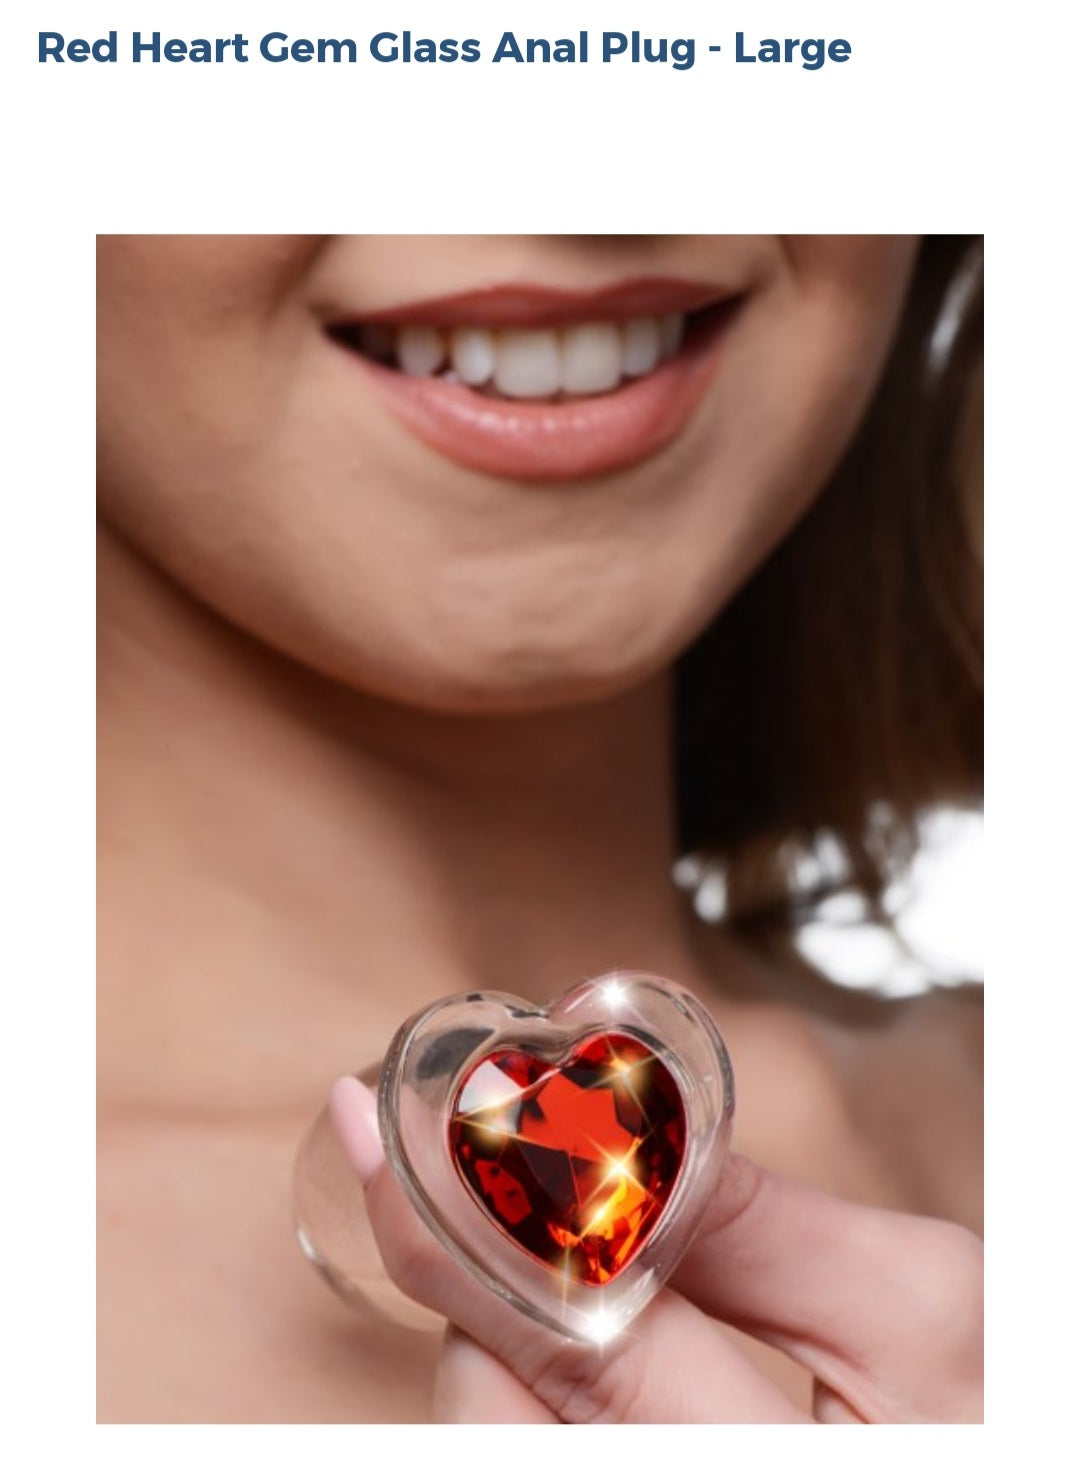 Booty Sparks Red Heart ❤ Gem Large Glass Anal Plug